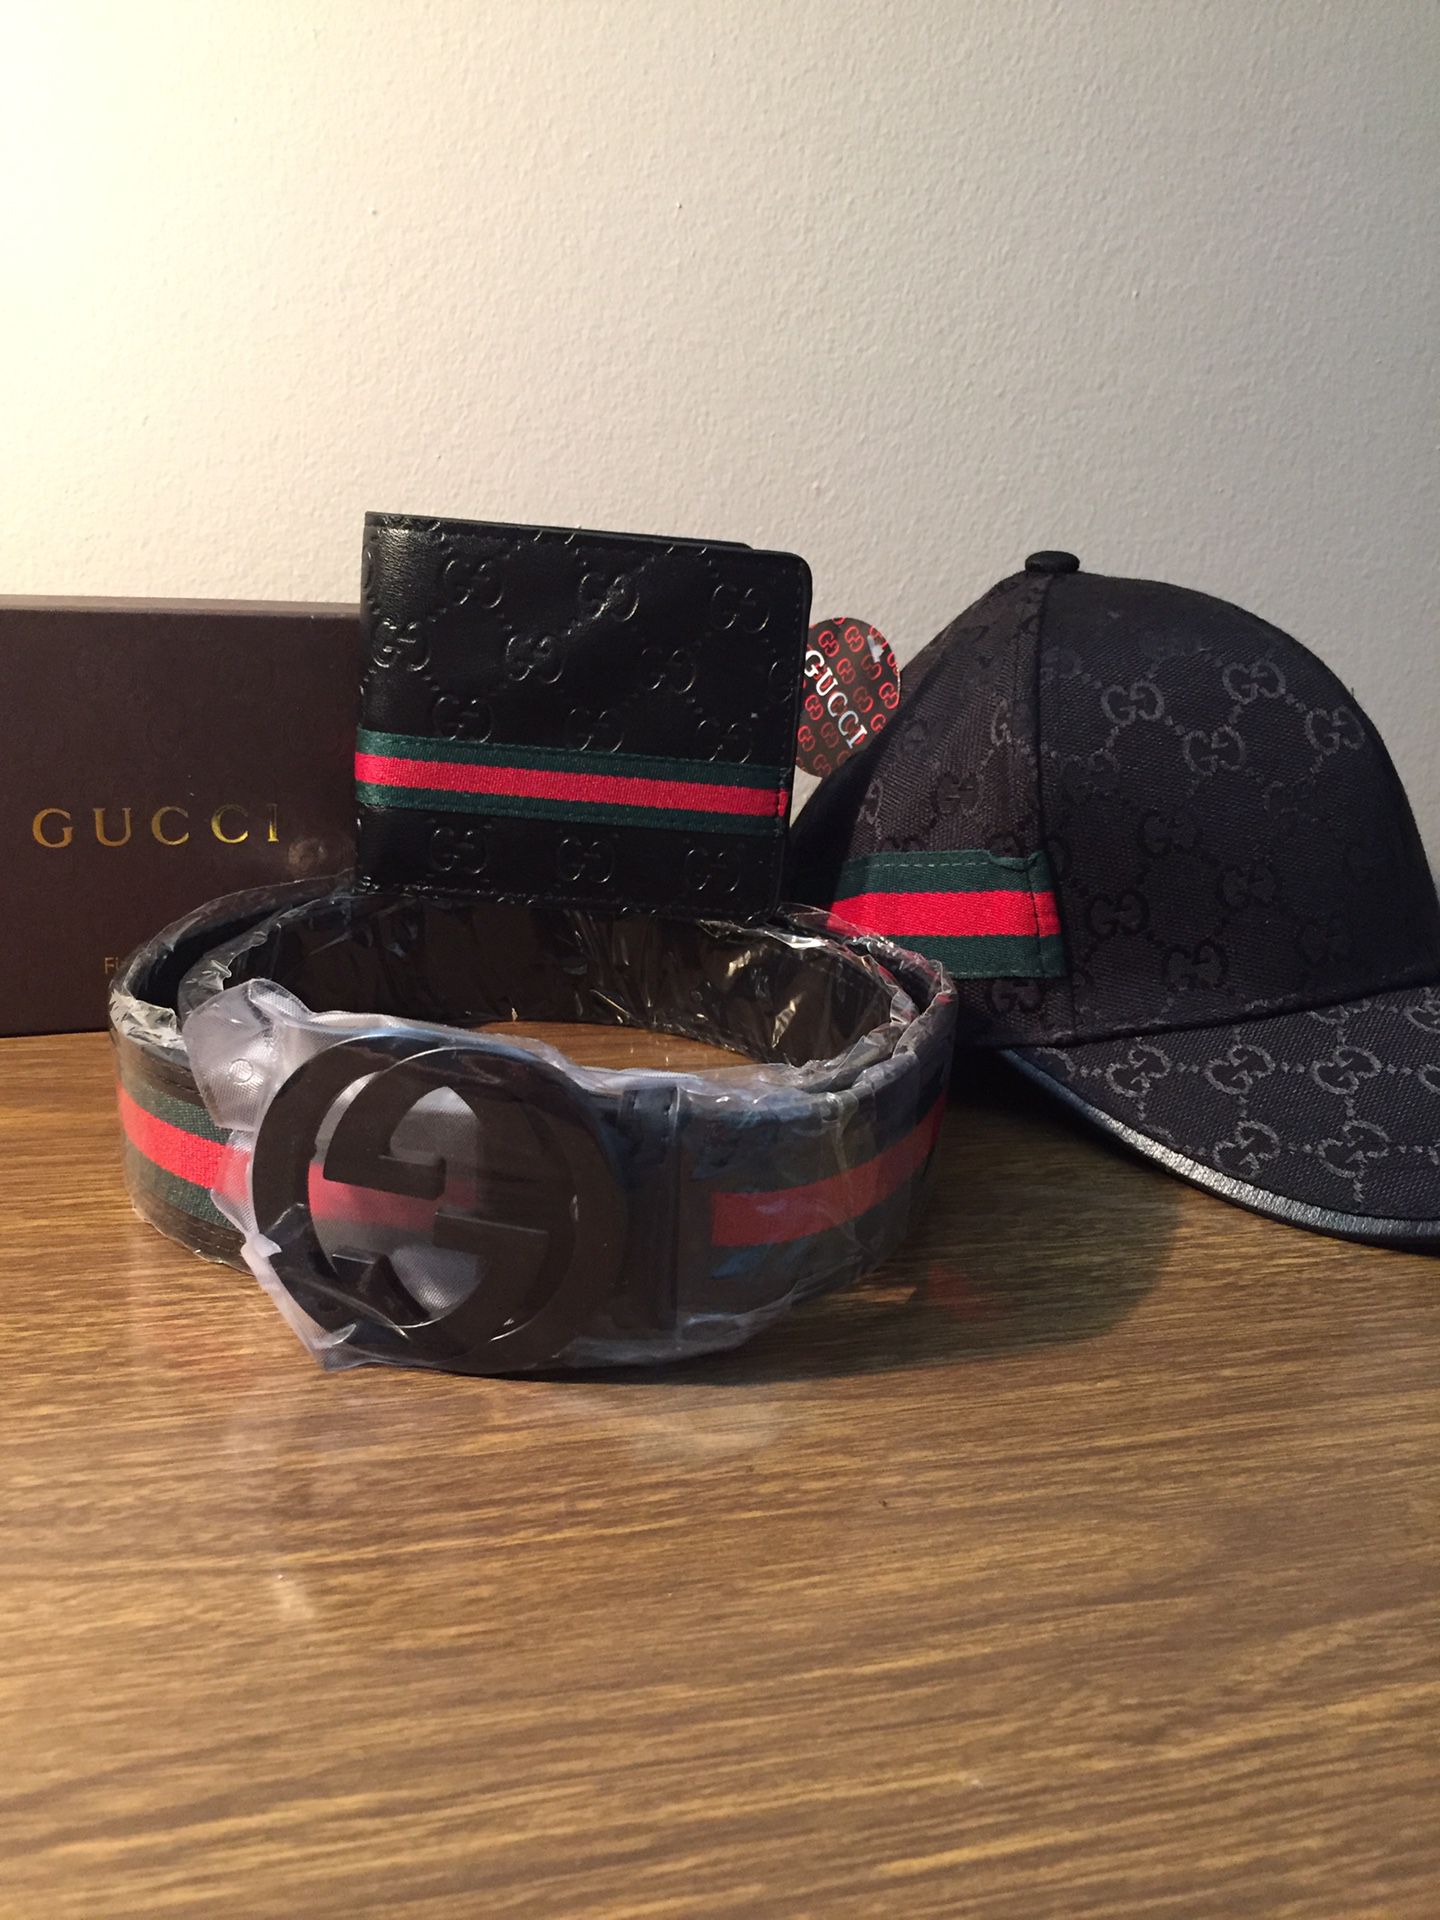 Matching Gucci Collection! Black Belt, Hat, and Wallet!